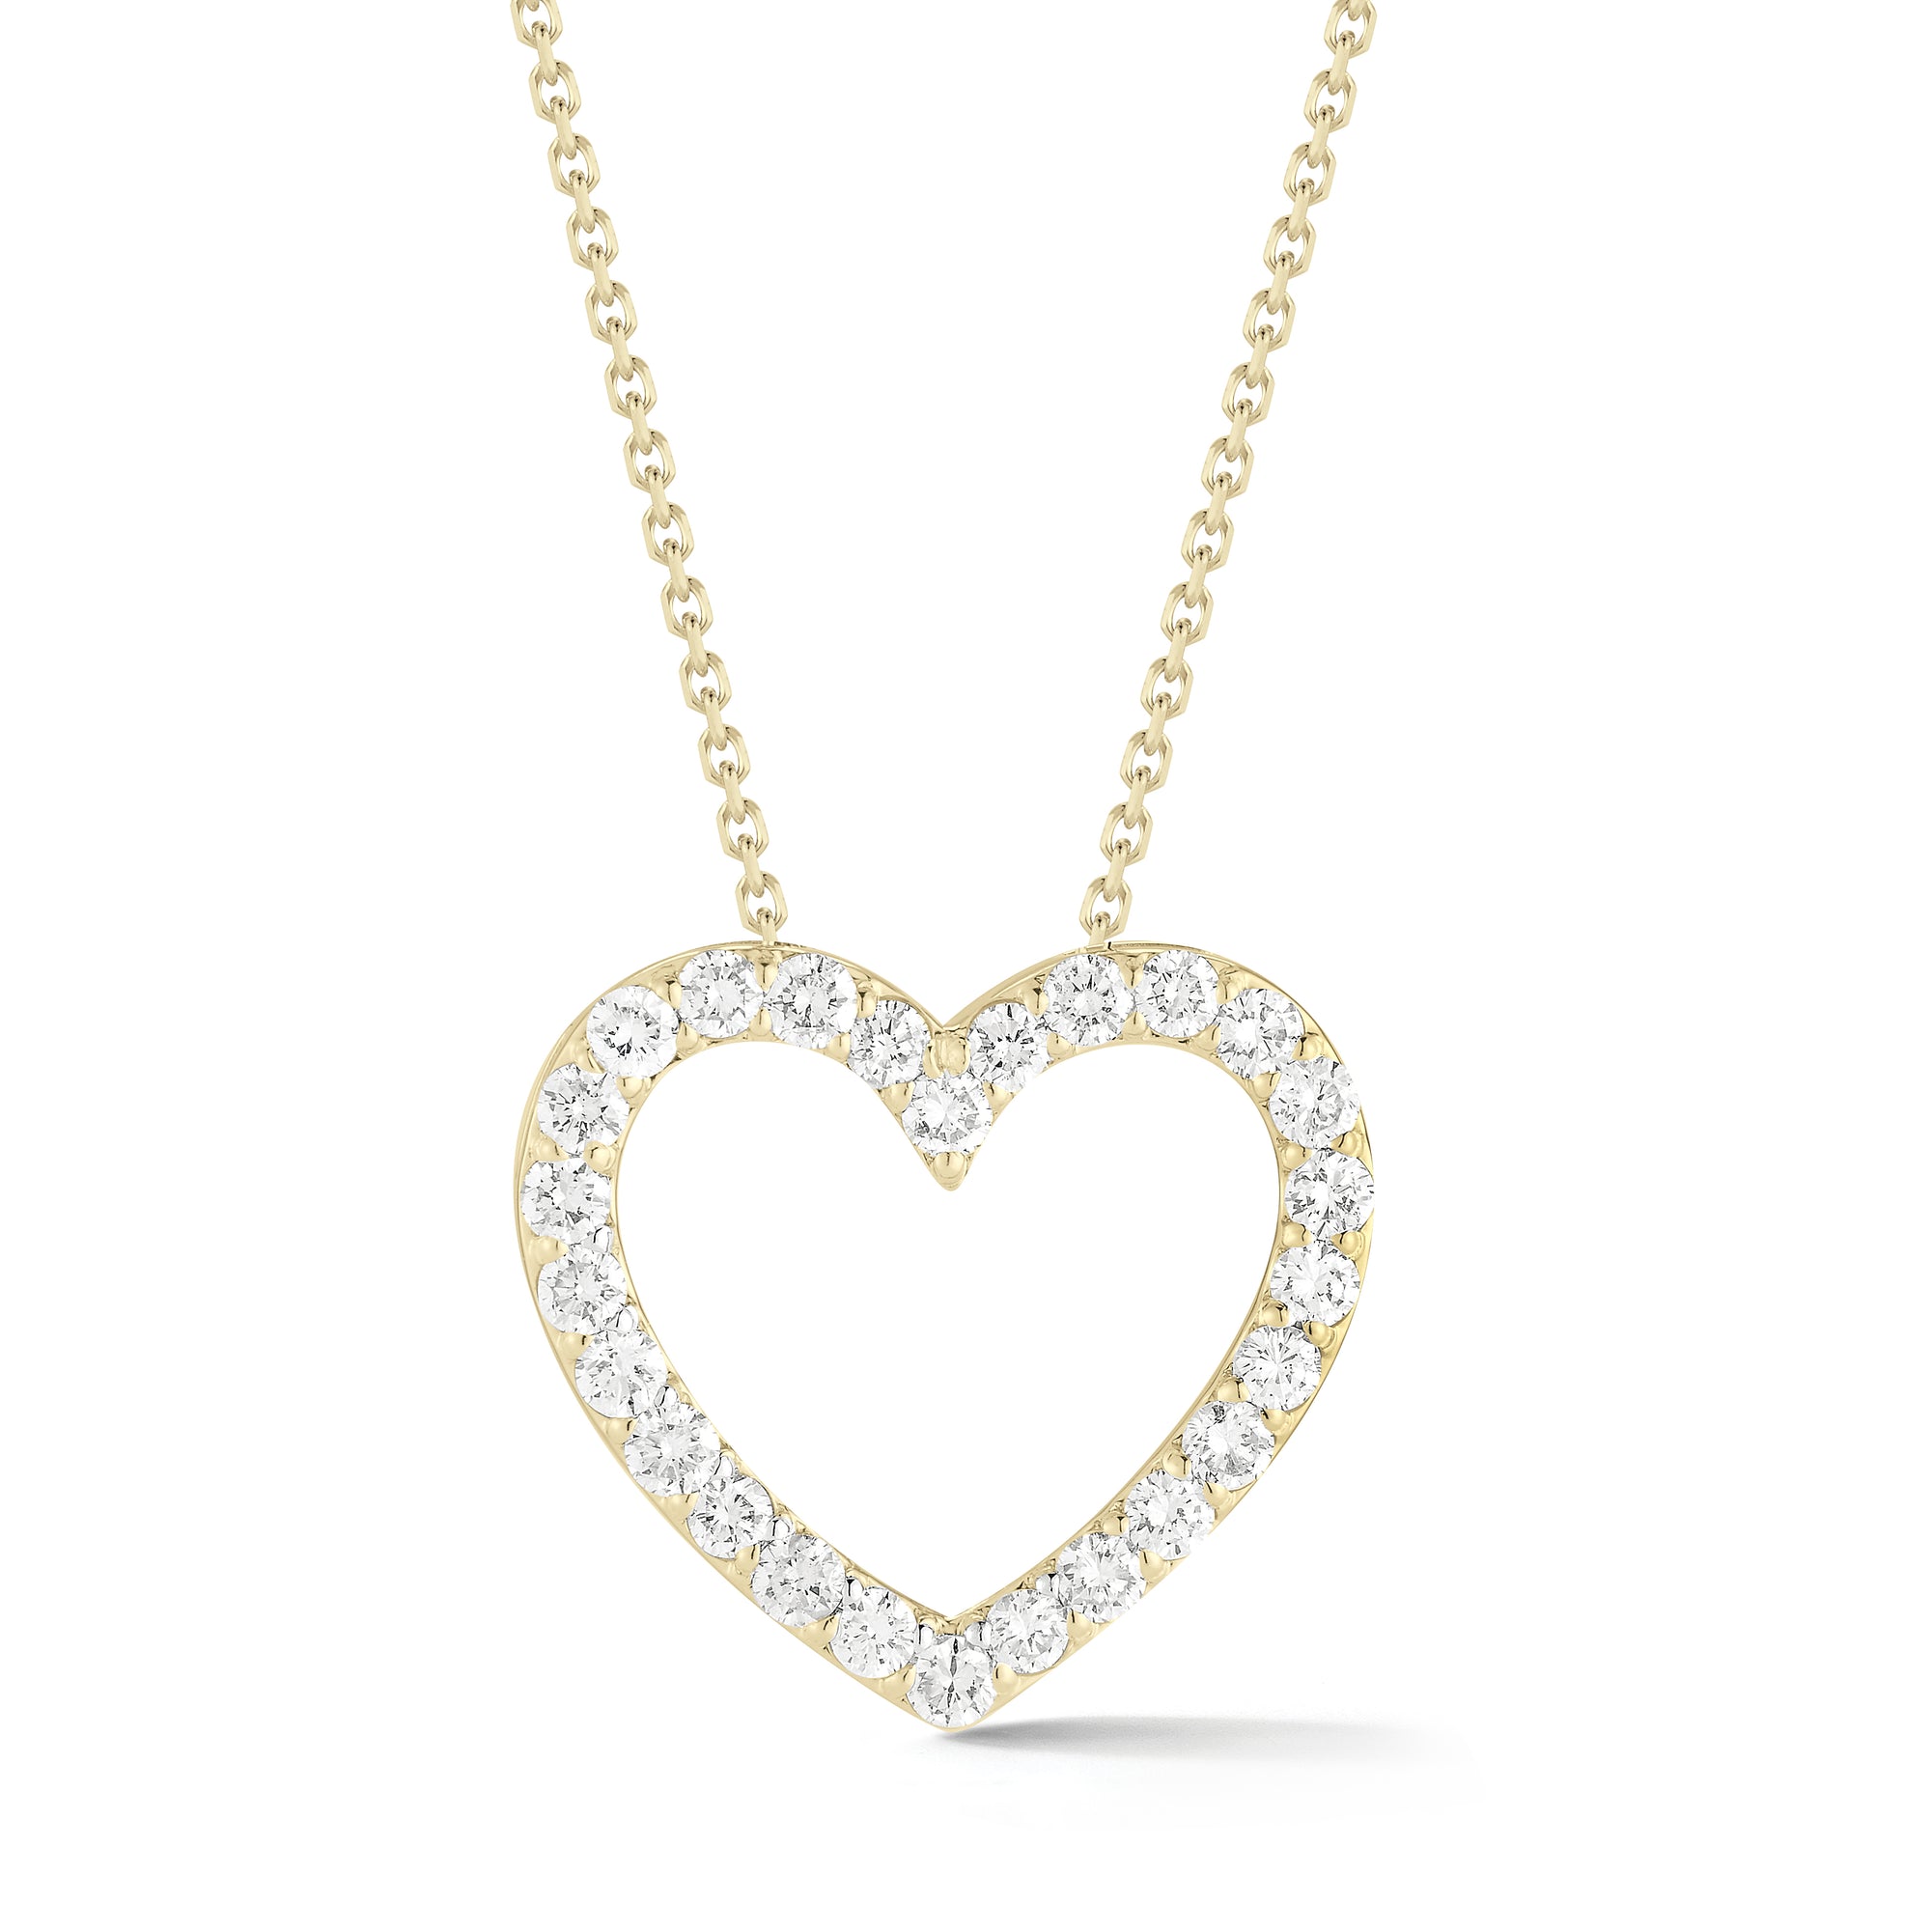 Diamond Heart Cutout Pendant Necklace  -14K gold weighing 3.3 grams  -26 round shared prong-set brilliant diamonds totaling 0.75 carats  -Chain measures 16 inches.